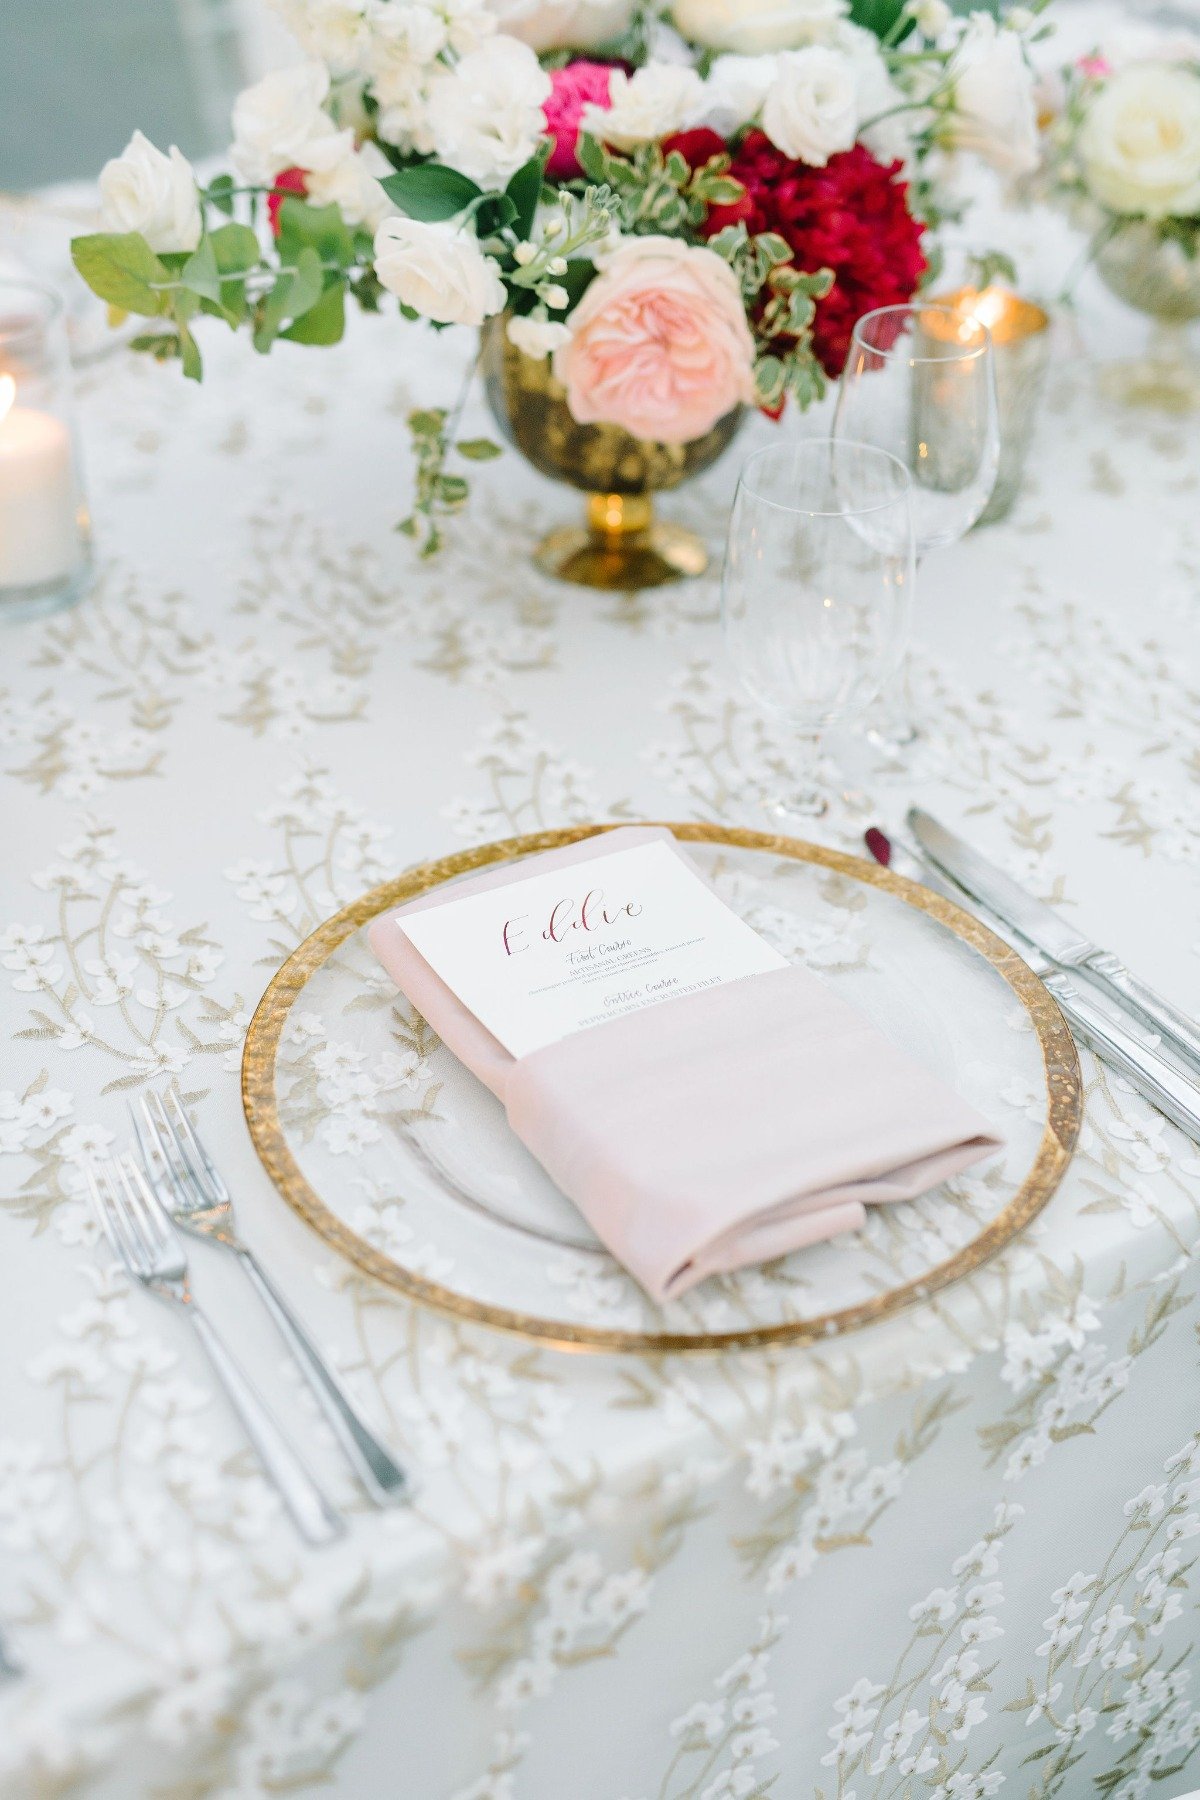 clear gold rimmed chargers with blush napkins for table setting